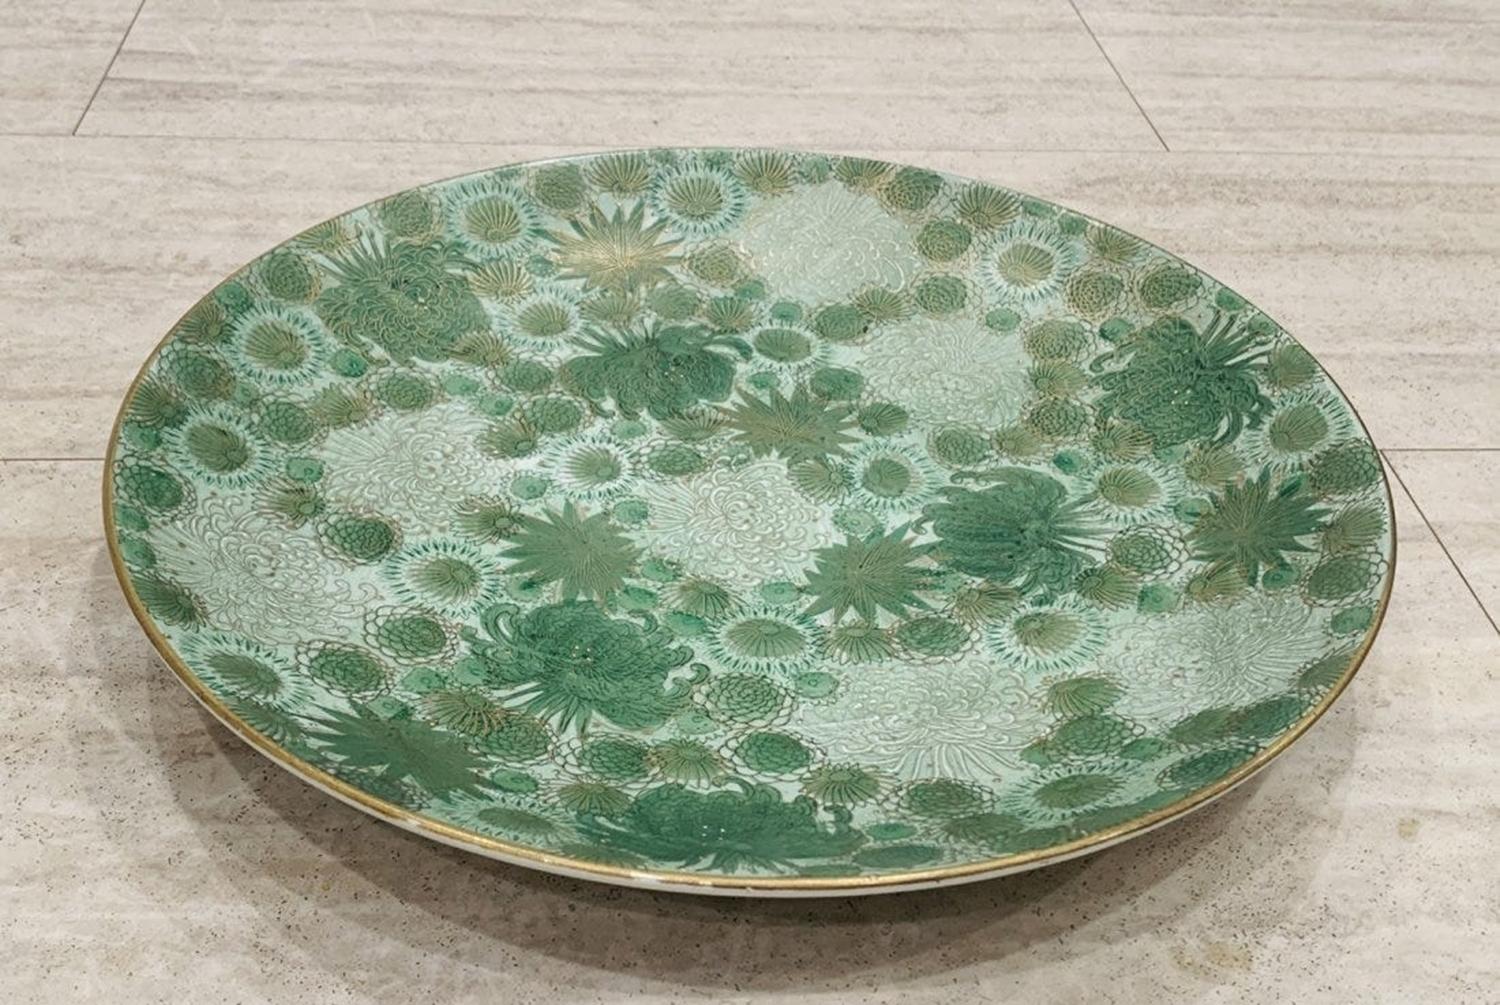 Vintage or antique charger or plater made in Japan and marked Genuine Kutani.

The piece has beautiful details, free foliage and flowers with gold accents.

The piece is in excellent condition, no chips, or brakes.

Measurements:
18 inches in